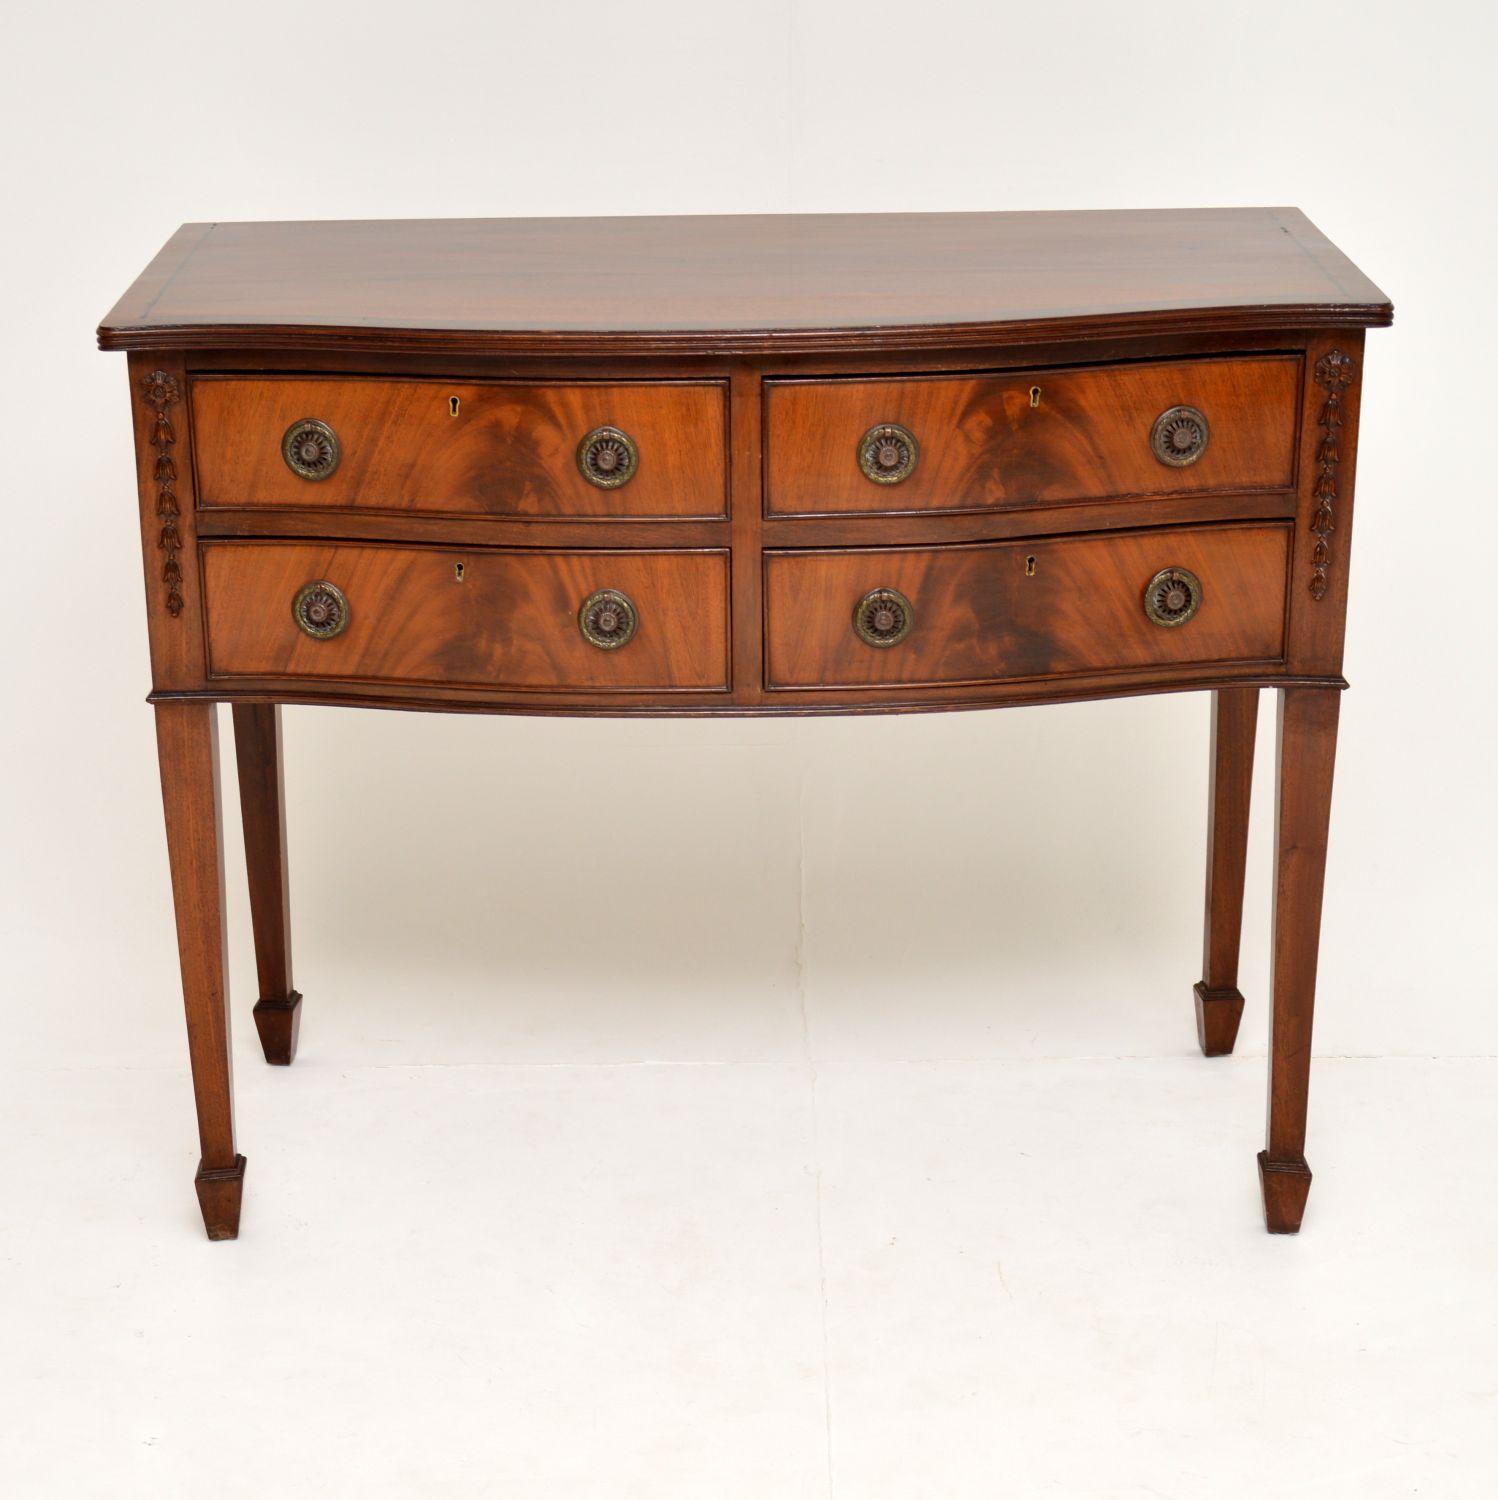 Antique George III style mahogany server side table in good condition, of fine quality and dating from circa 1930s period.

It has a serpentine shaped front, four drawers with brass handles and sits on tapered spade end legs. The top has a